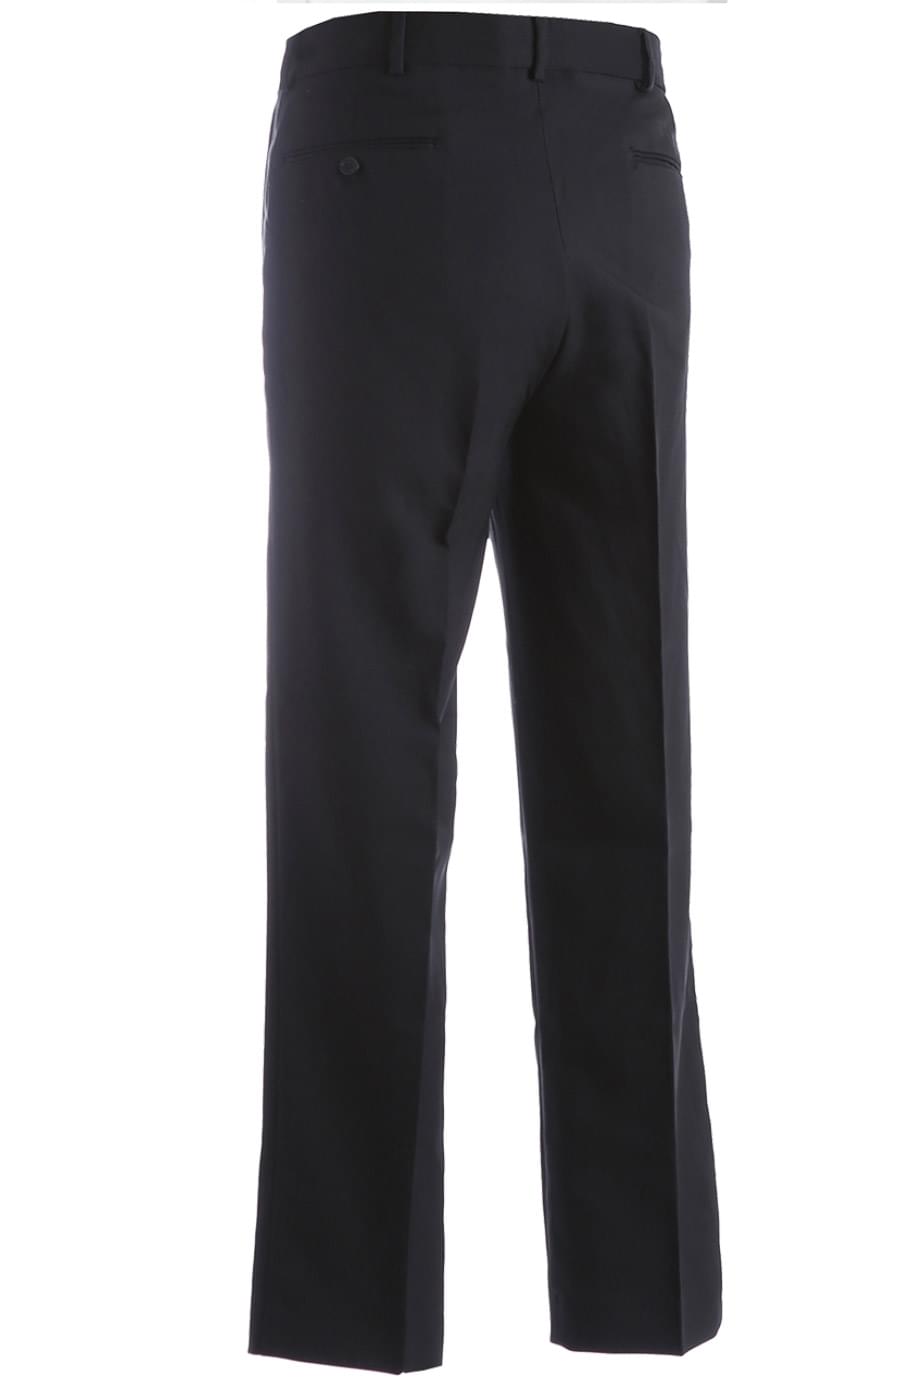 edwards POLYESTER FLAT FRONT PANT